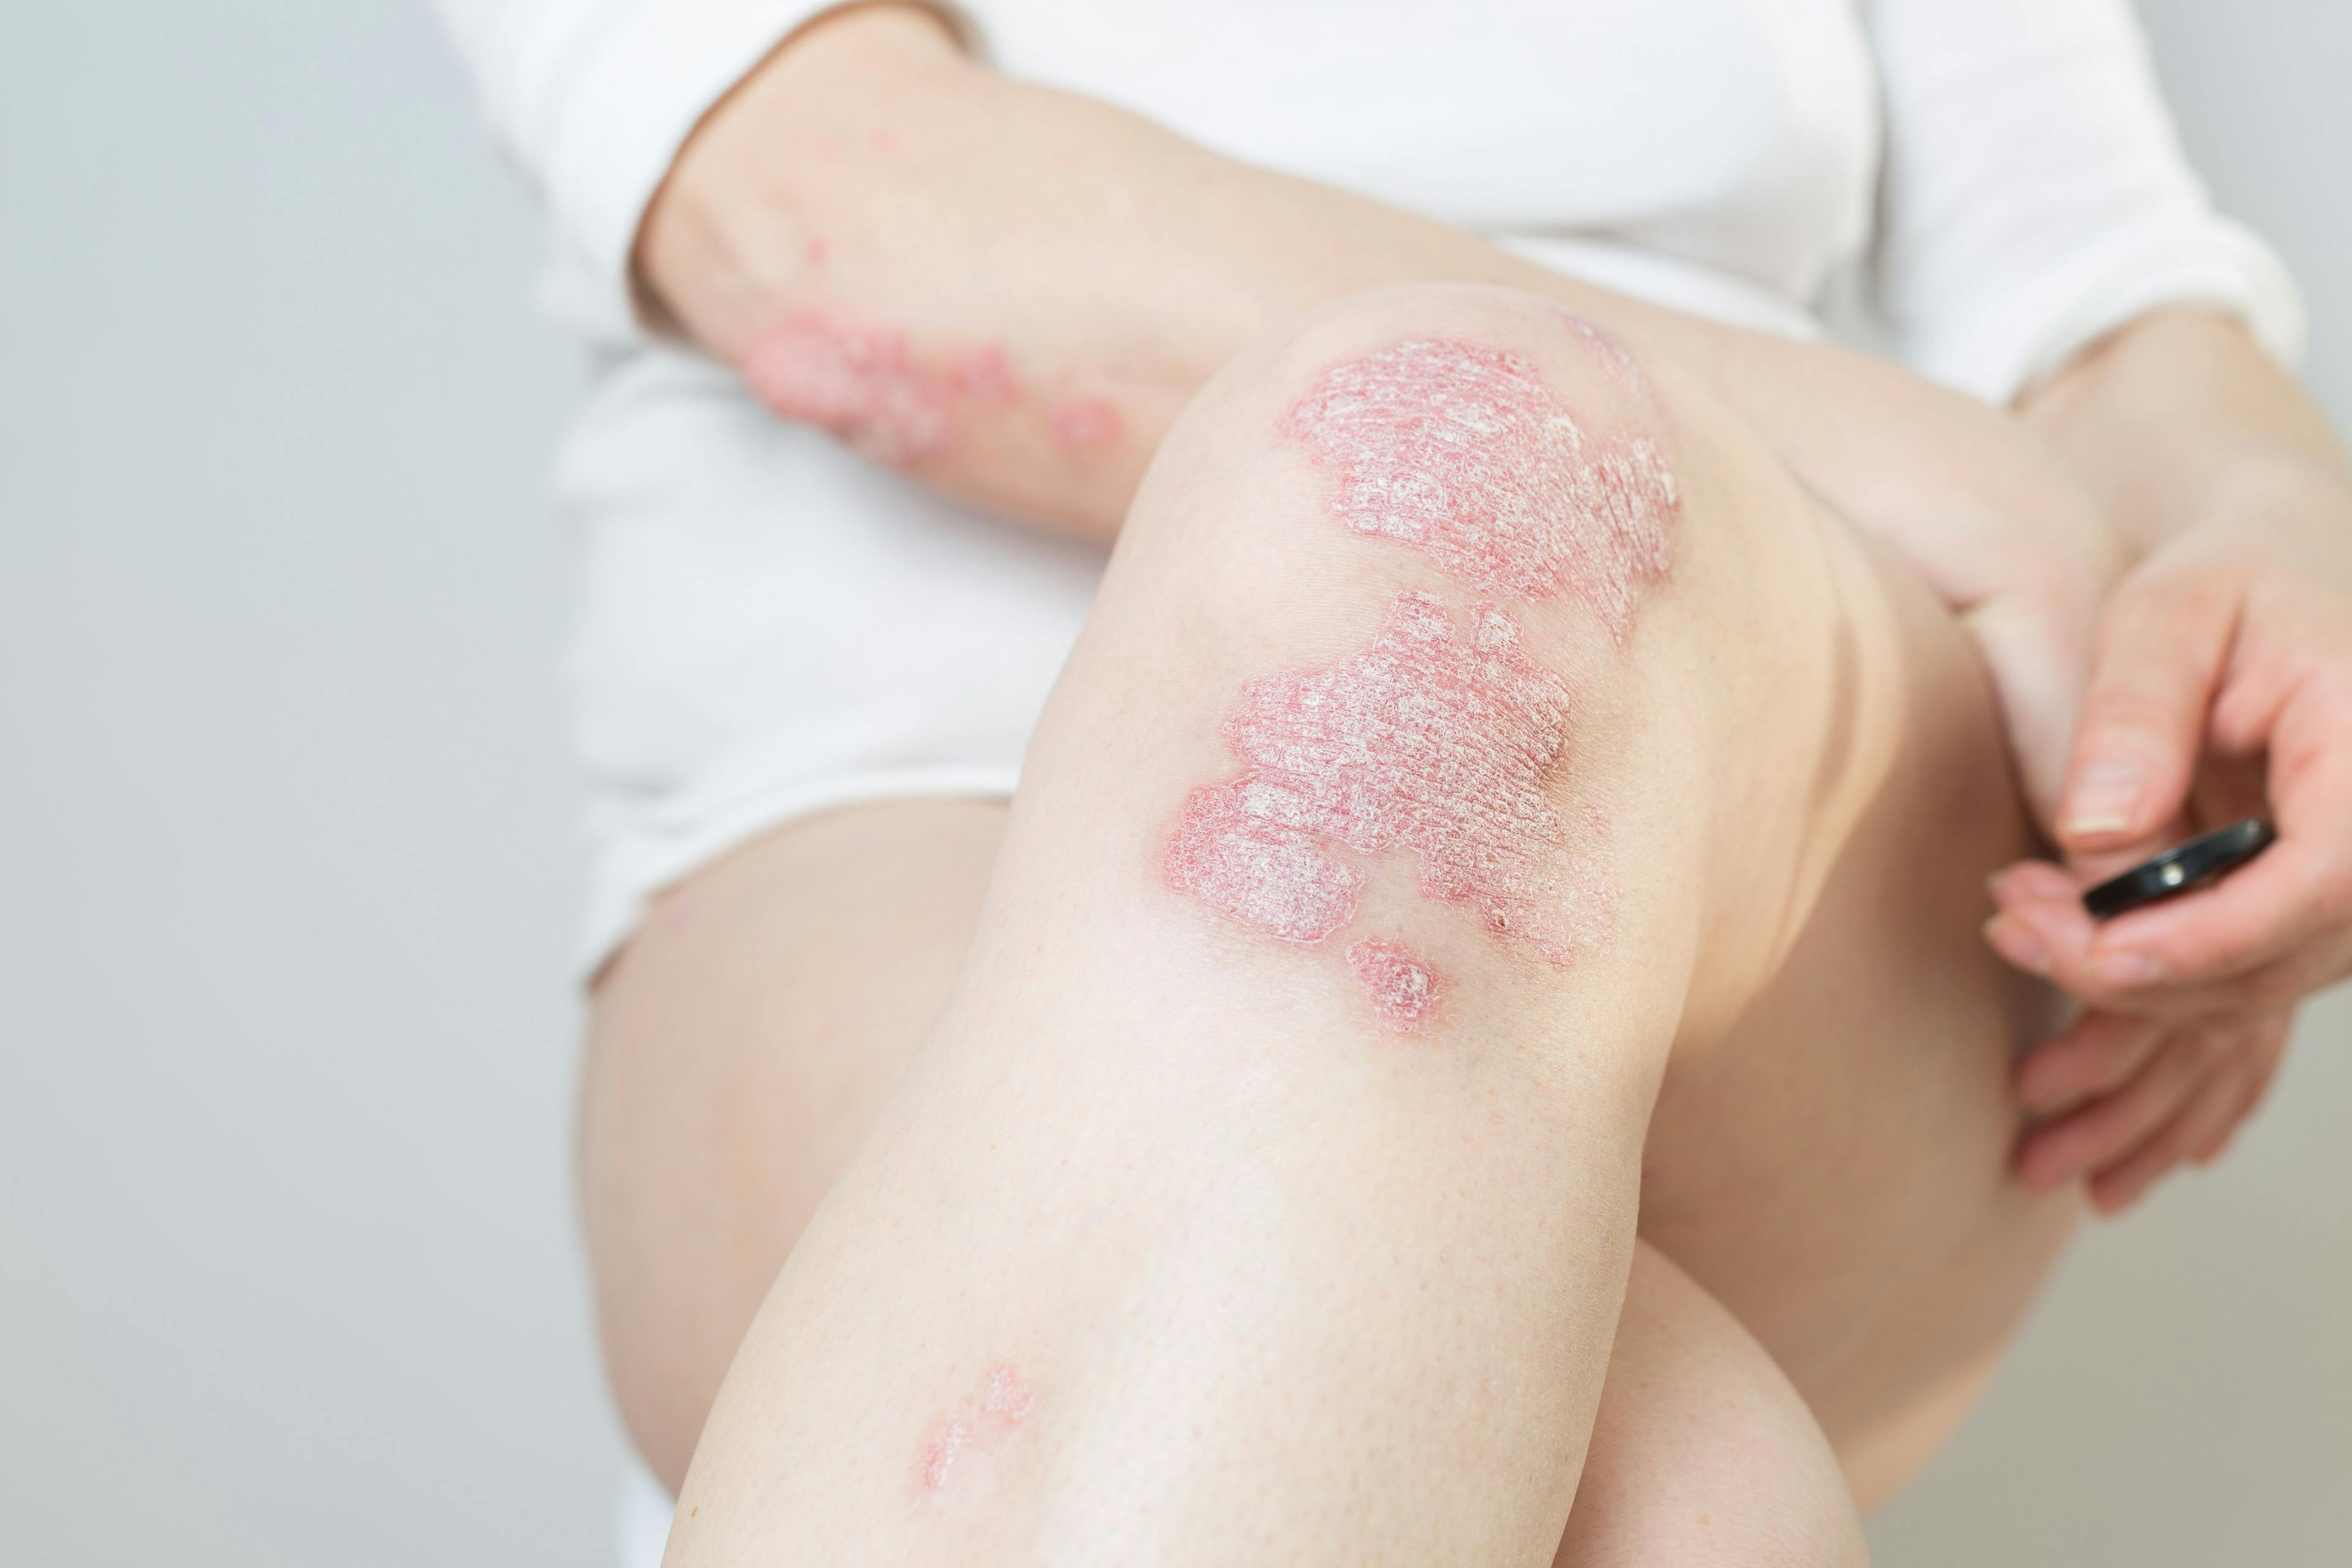 Woman with psoriasis plaques on the knees sits cross-legged.